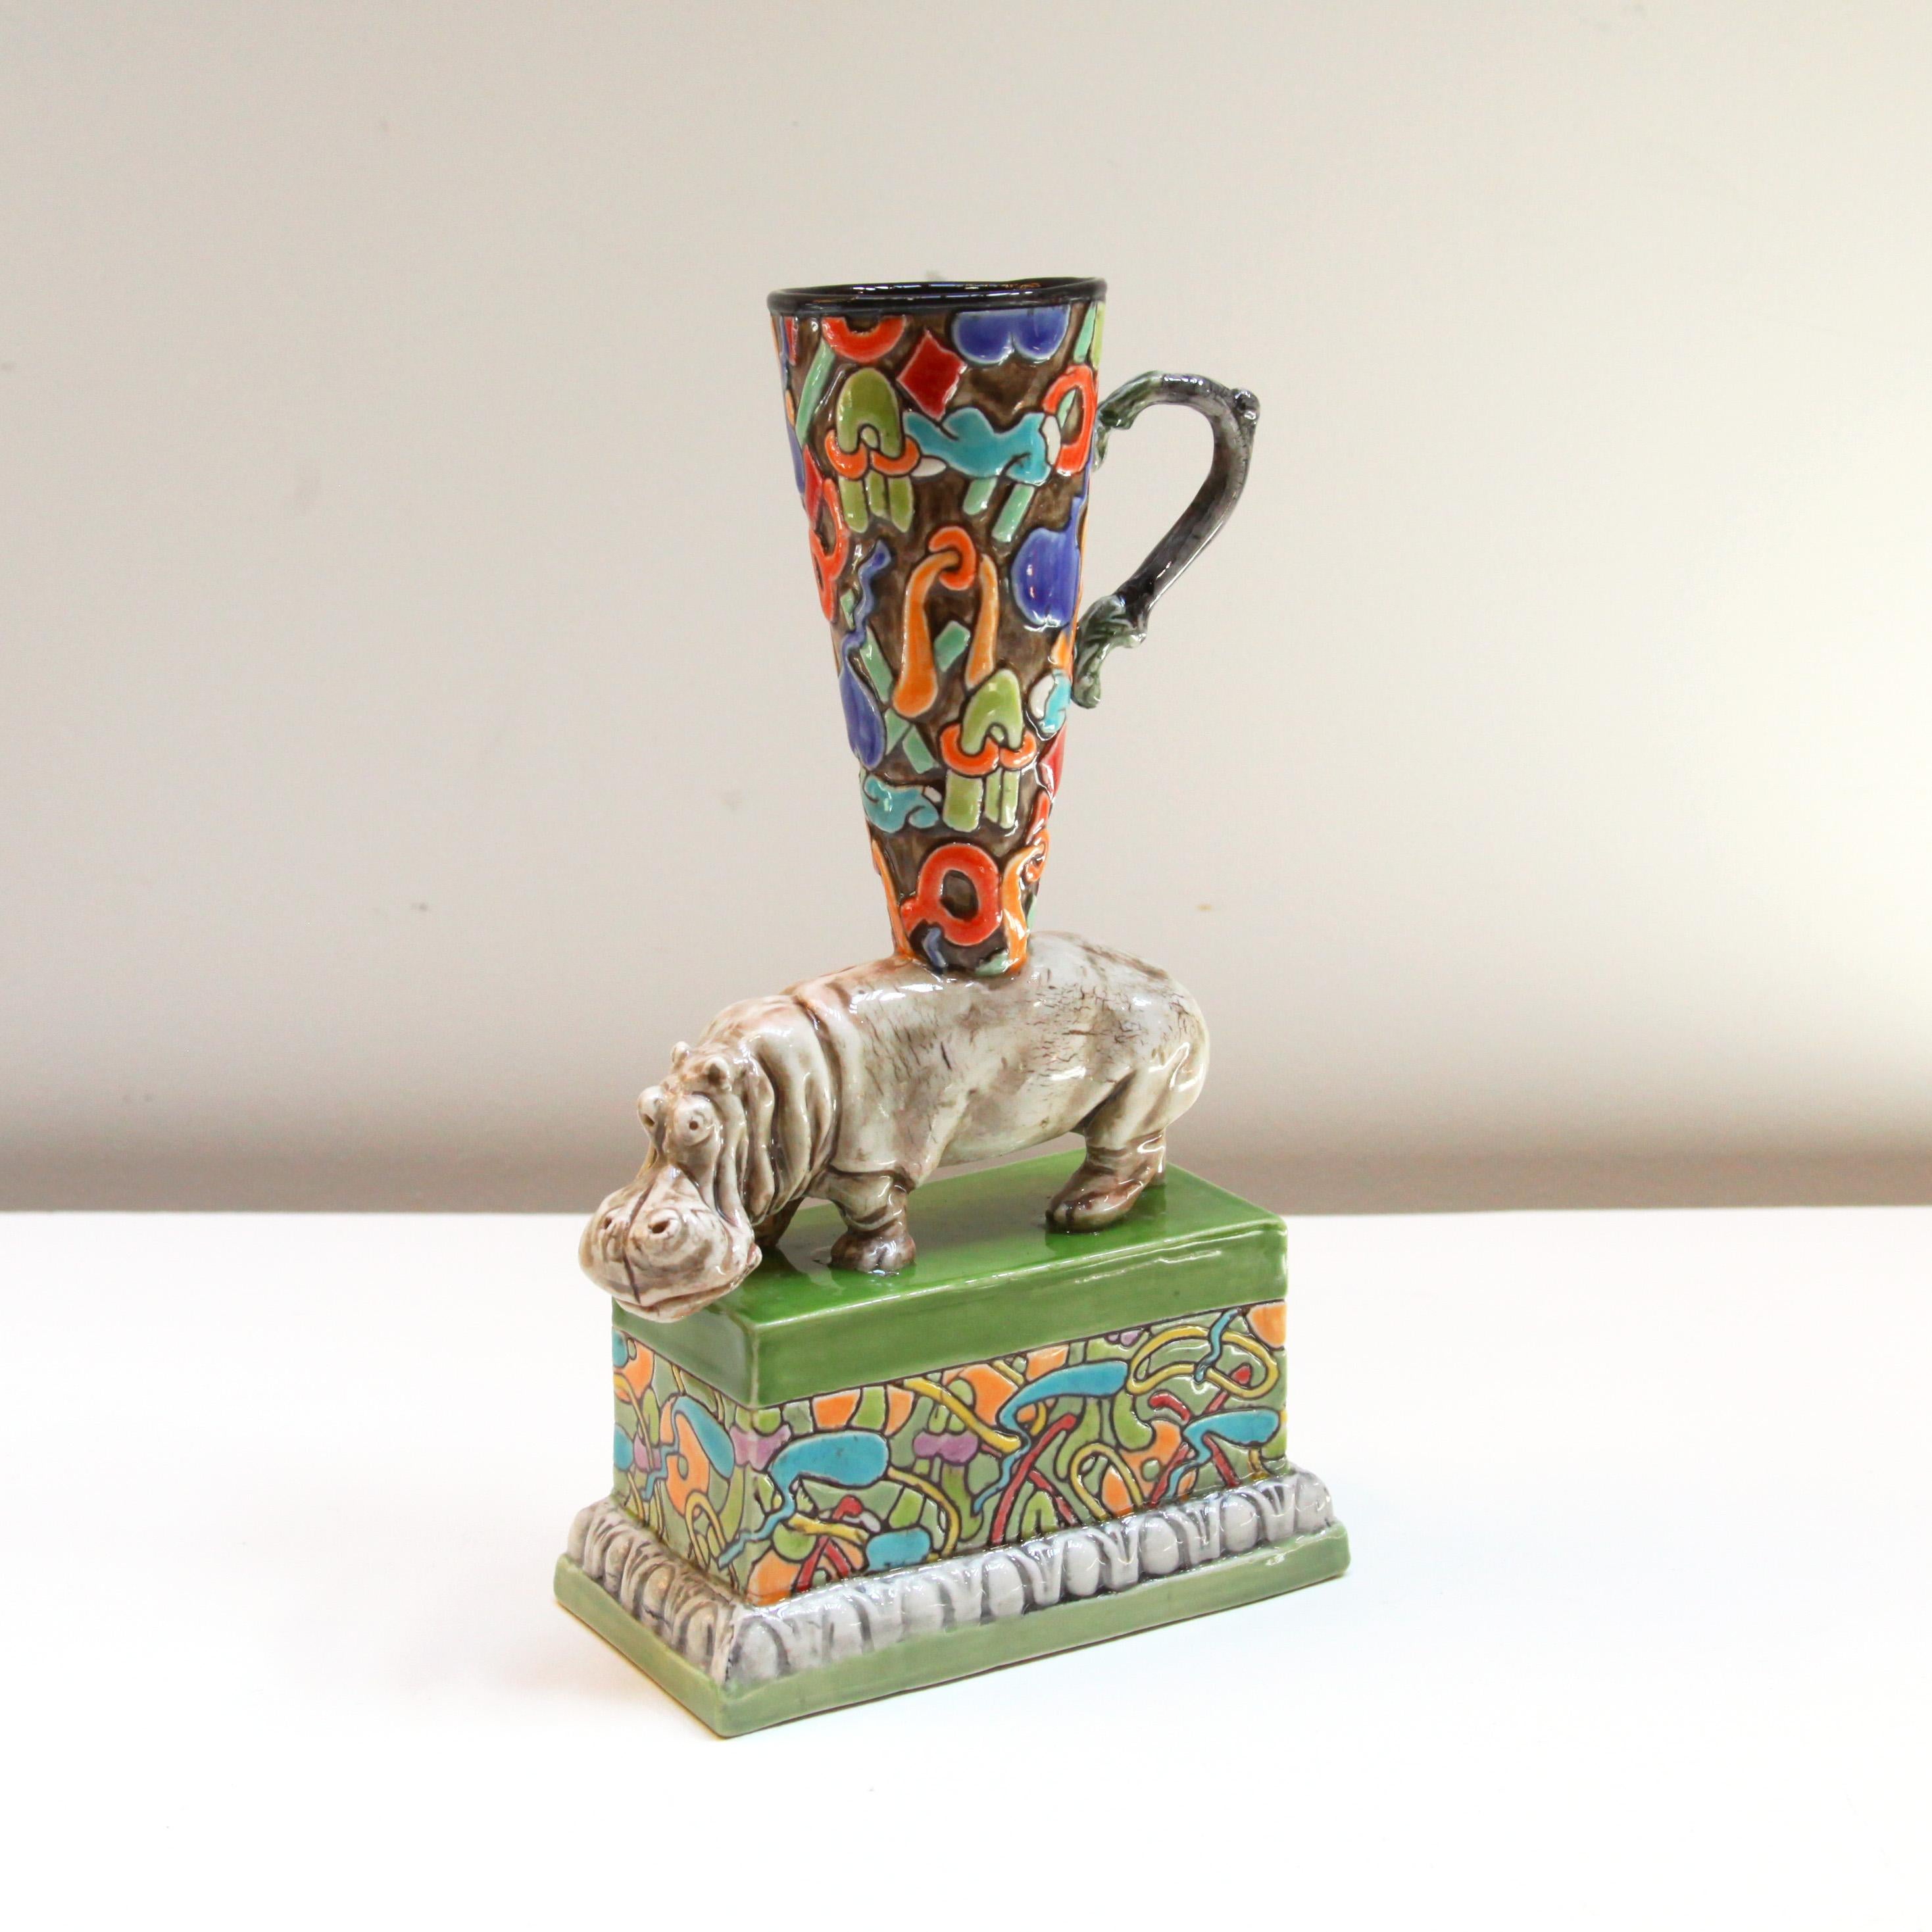 Contemporary Functional Vessel, "Big Hippo Drinking Cup" - Art by Ron Carlson